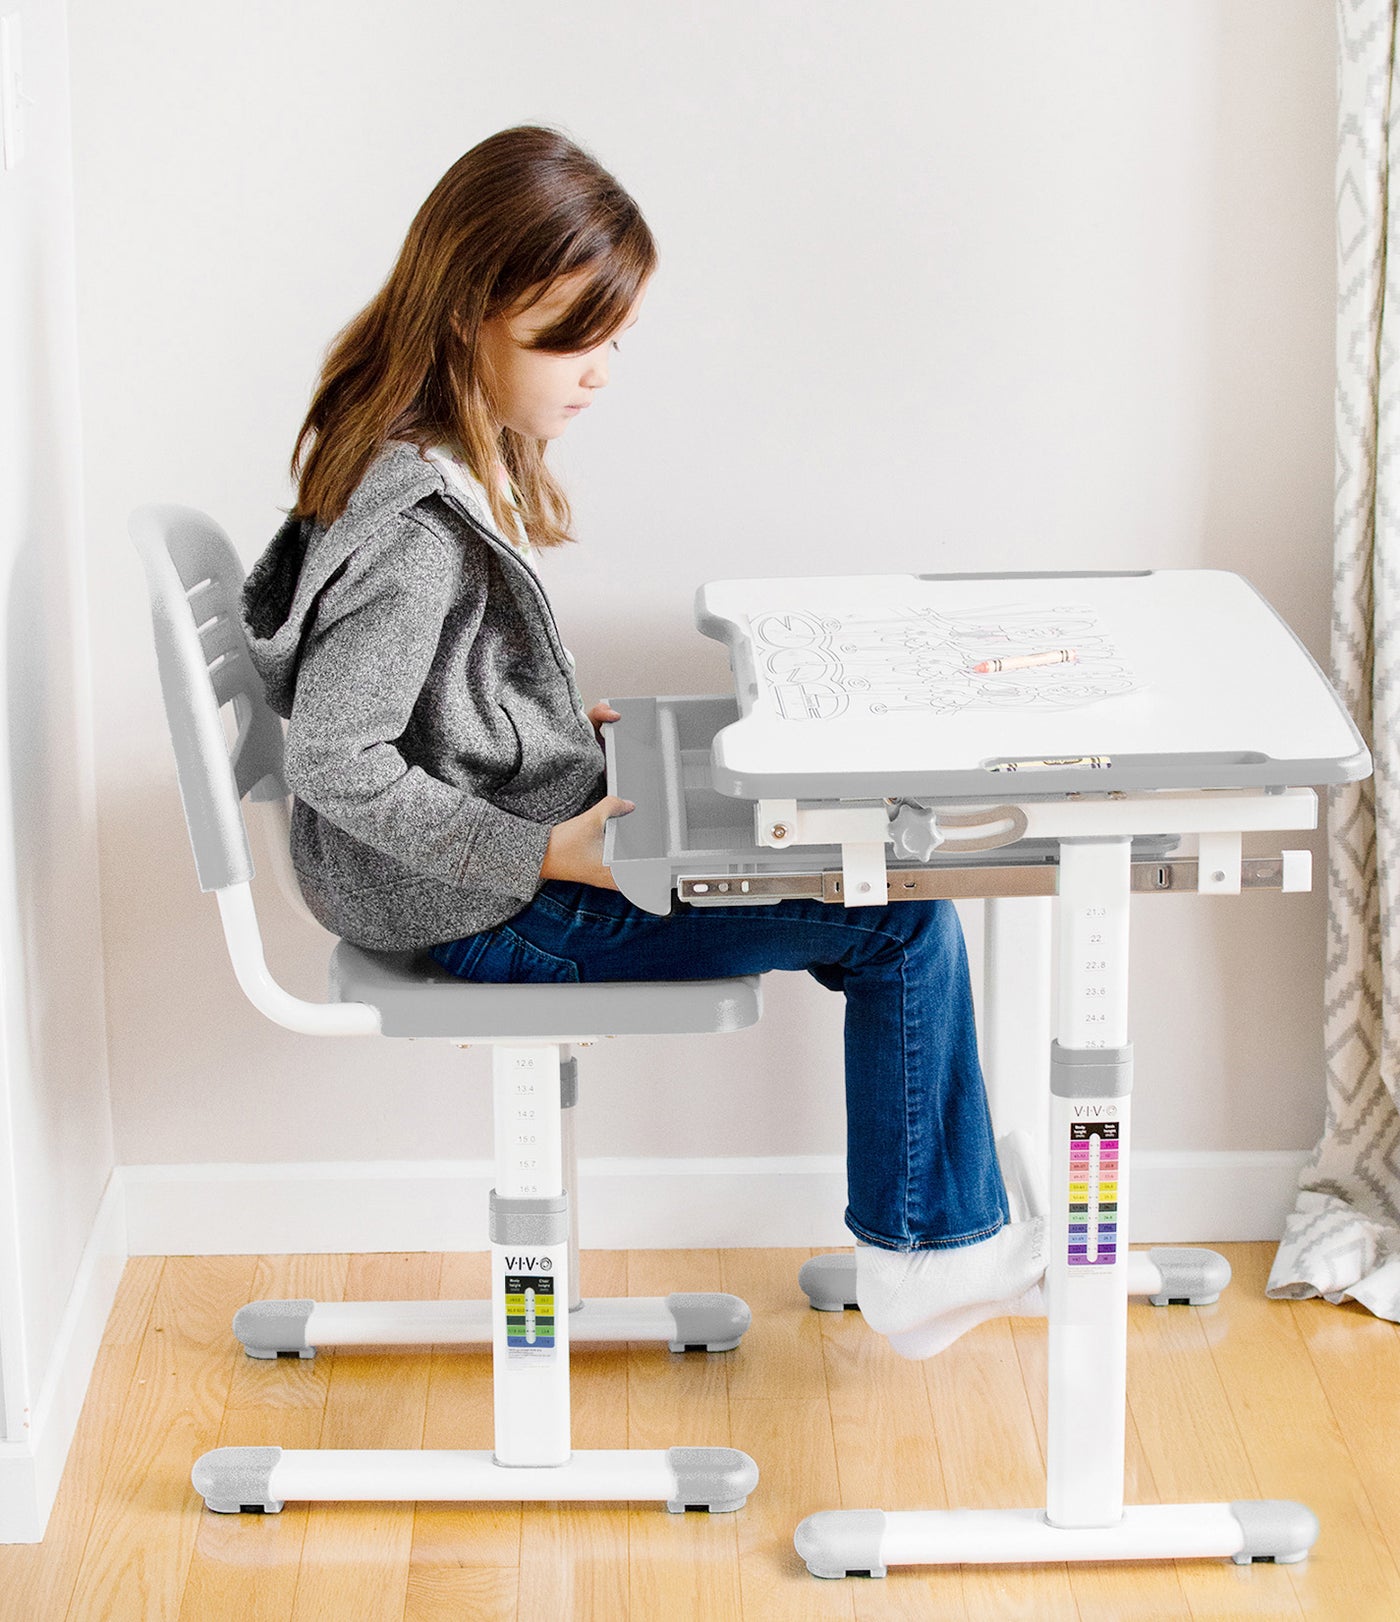 A girl working at a height-adjustable ergonomic kid's desk.